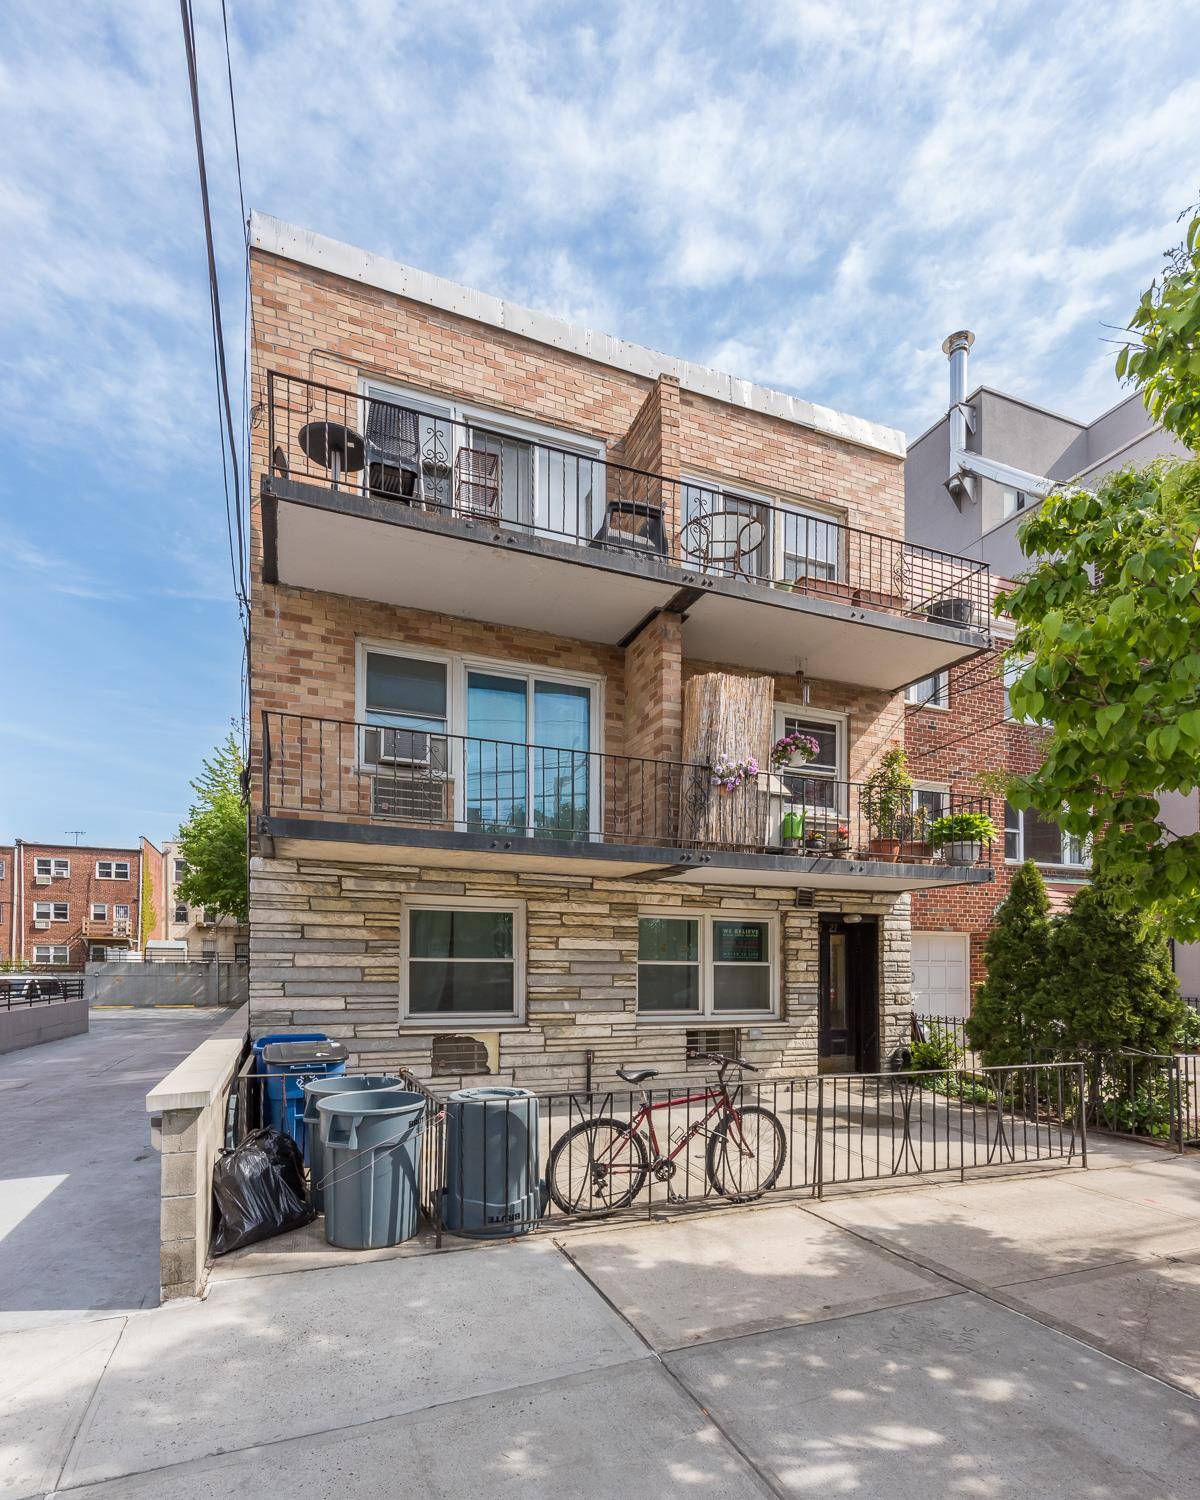 We are pleased to announce that we have been exclusively retained to handle the sale of 26 27 28th Street in Astoria, Queens NY.